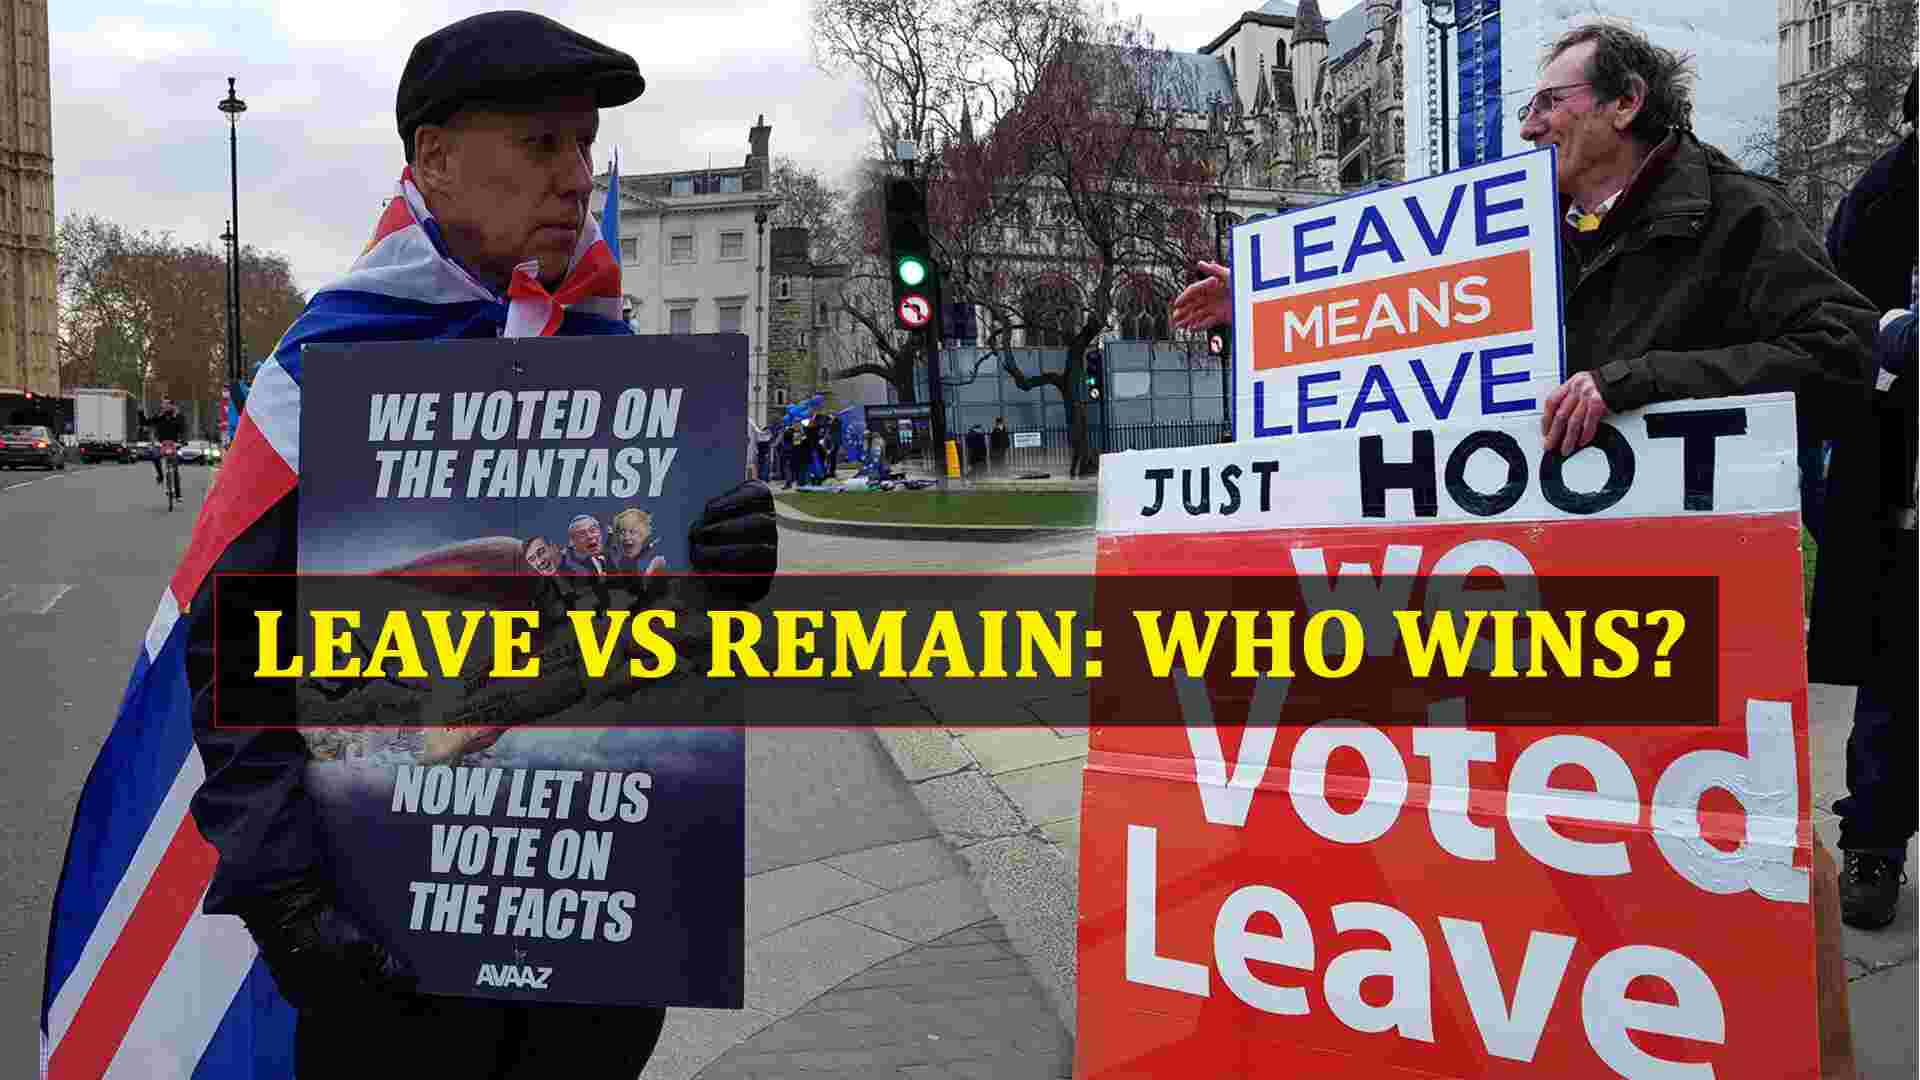 Brexit: Leave or Remain? Who has the best arguments?